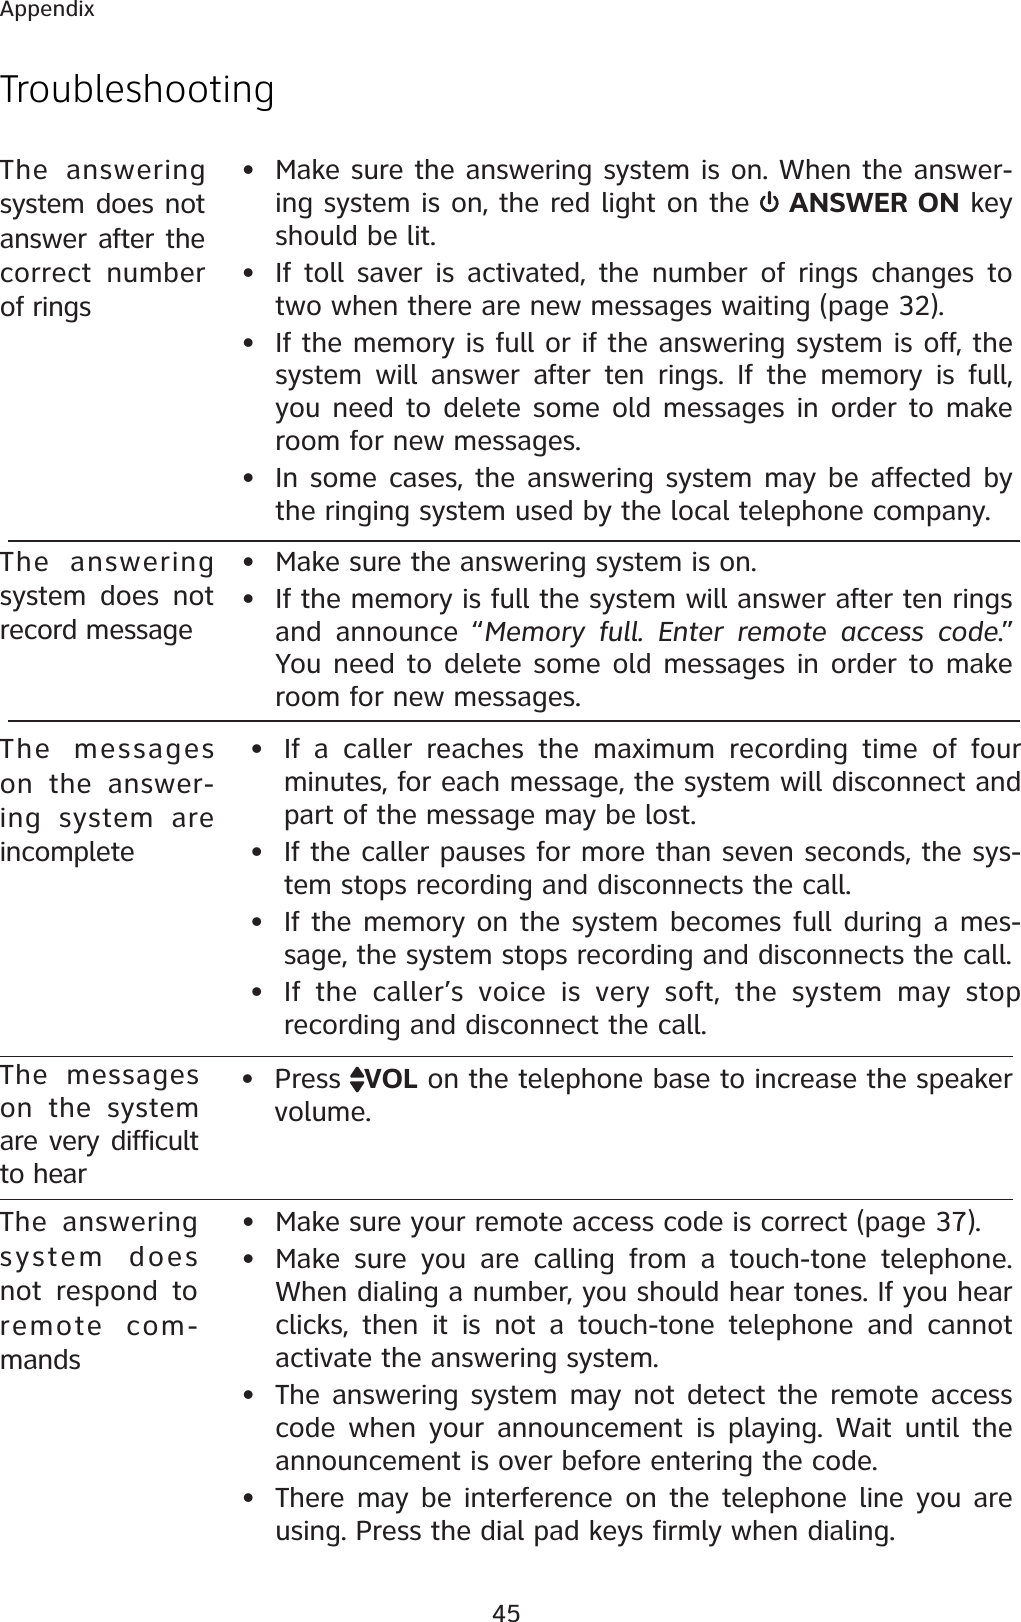 45AppendixTroubleshootingThe answering system does not respond to remote com-mands• Make sure your remote access code is correct (page 37).• Make sure you are calling from a touch-tone telephone. When dialing a number, you should hear tones. If you hear clicks, then it is not a touch-tone telephone and cannot activate the answering system.• The answering system may not detect the remote access code when your announcement is playing. Wait until the announcement is over before entering the code.• There may be interference on the telephone line you are using. Press the dial pad keys firmly when dialing.The answering system does not answer after the correct number of rings• Make sure the answering system is on. When the answer-ing system is on, the red light on the  ANSWER ON key should be lit.• If toll saver is activated, the number of rings changes to two when there are new messages waiting (page 32).• If the memory is full or if the answering system is off, the system will answer after ten rings. If the memory is full, you need to delete some old messages in order to make room for new messages.• In some cases, the answering system may be affected by the ringing system used by the local telephone company.The answering system does not record message• Make sure the answering system is on.• If the memory is full the system will answer after ten rings and announce “Memory full. Enter remote access code.” You need to delete some old messages in order to make room for new messages.The messages on the answer-ing system are incomplete• If a caller reaches the maximum recording time of four minutes, for each message, the system will disconnect and part of the message may be lost. • If the caller pauses for more than seven seconds, the sys-tem stops recording and disconnects the call.• If the memory on the system becomes full during a mes-sage, the system stops recording and disconnects the call.• If the caller’s voice is very soft, the system may stop recording and disconnect the call.The messages on the system are very difficult to hear• Press  VOL on the telephone base to increase the speaker volume.